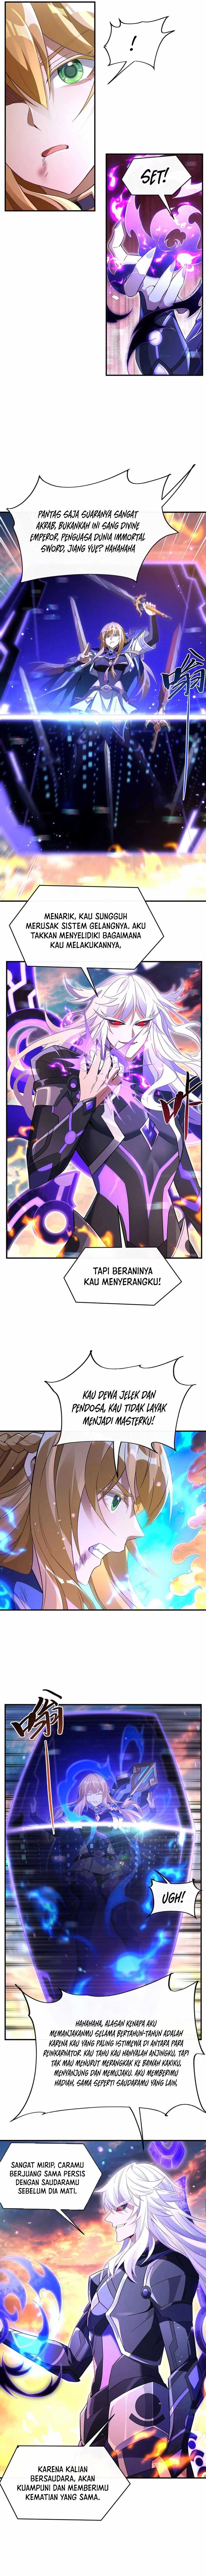 Dilarang COPAS - situs resmi www.mangacanblog.com - Komik my female apprentices are all big shots from the future 244 - chapter 244 245 Indonesia my female apprentices are all big shots from the future 244 - chapter 244 Terbaru 3|Baca Manga Komik Indonesia|Mangacan